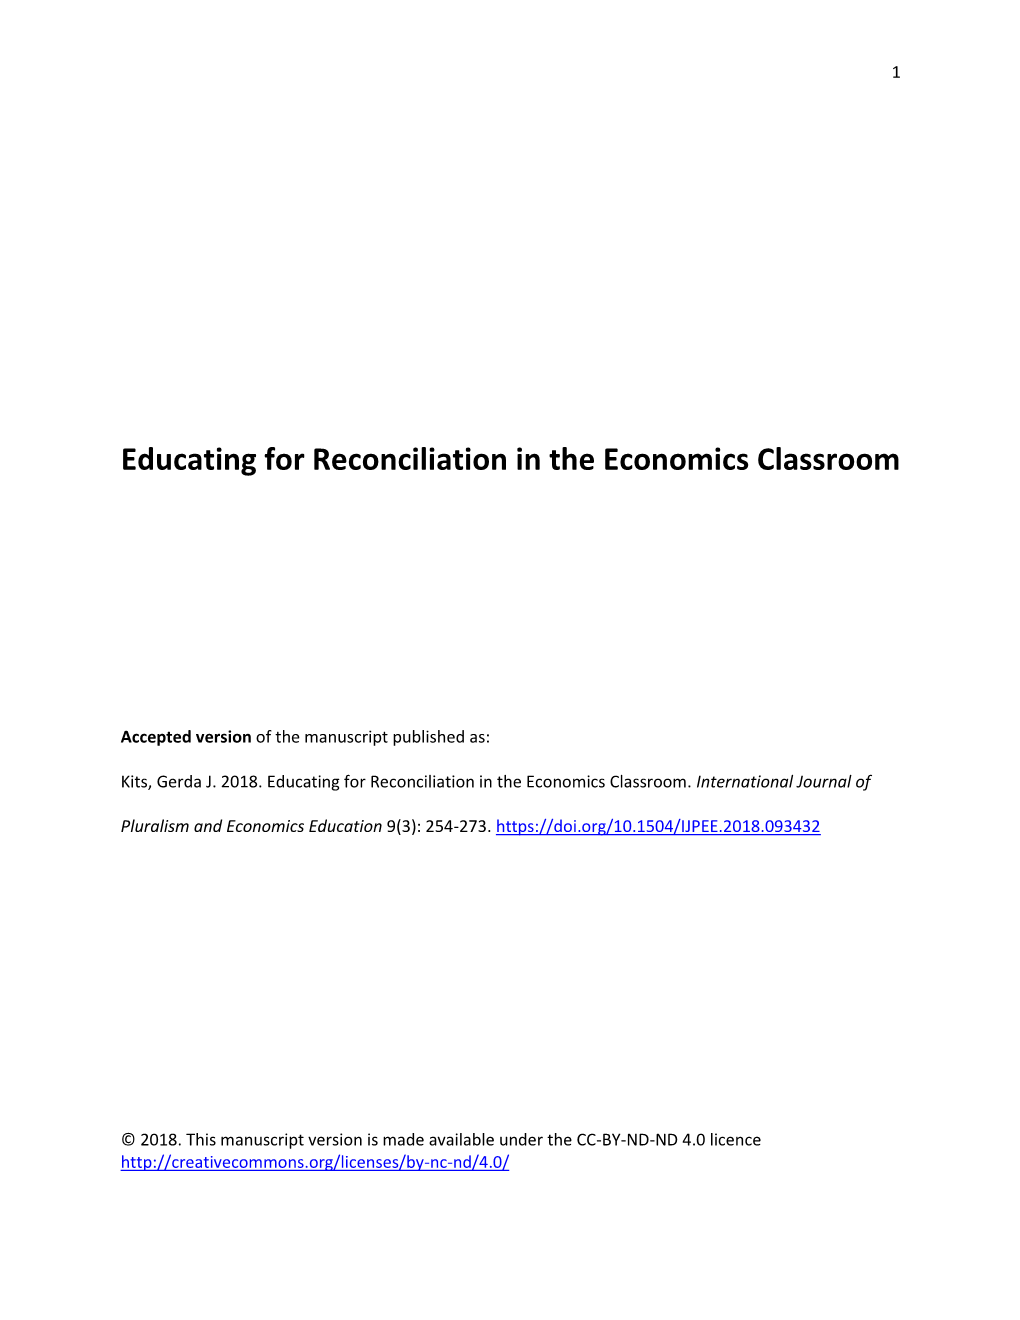 Educating for Reconciliation in the Economics Classroom